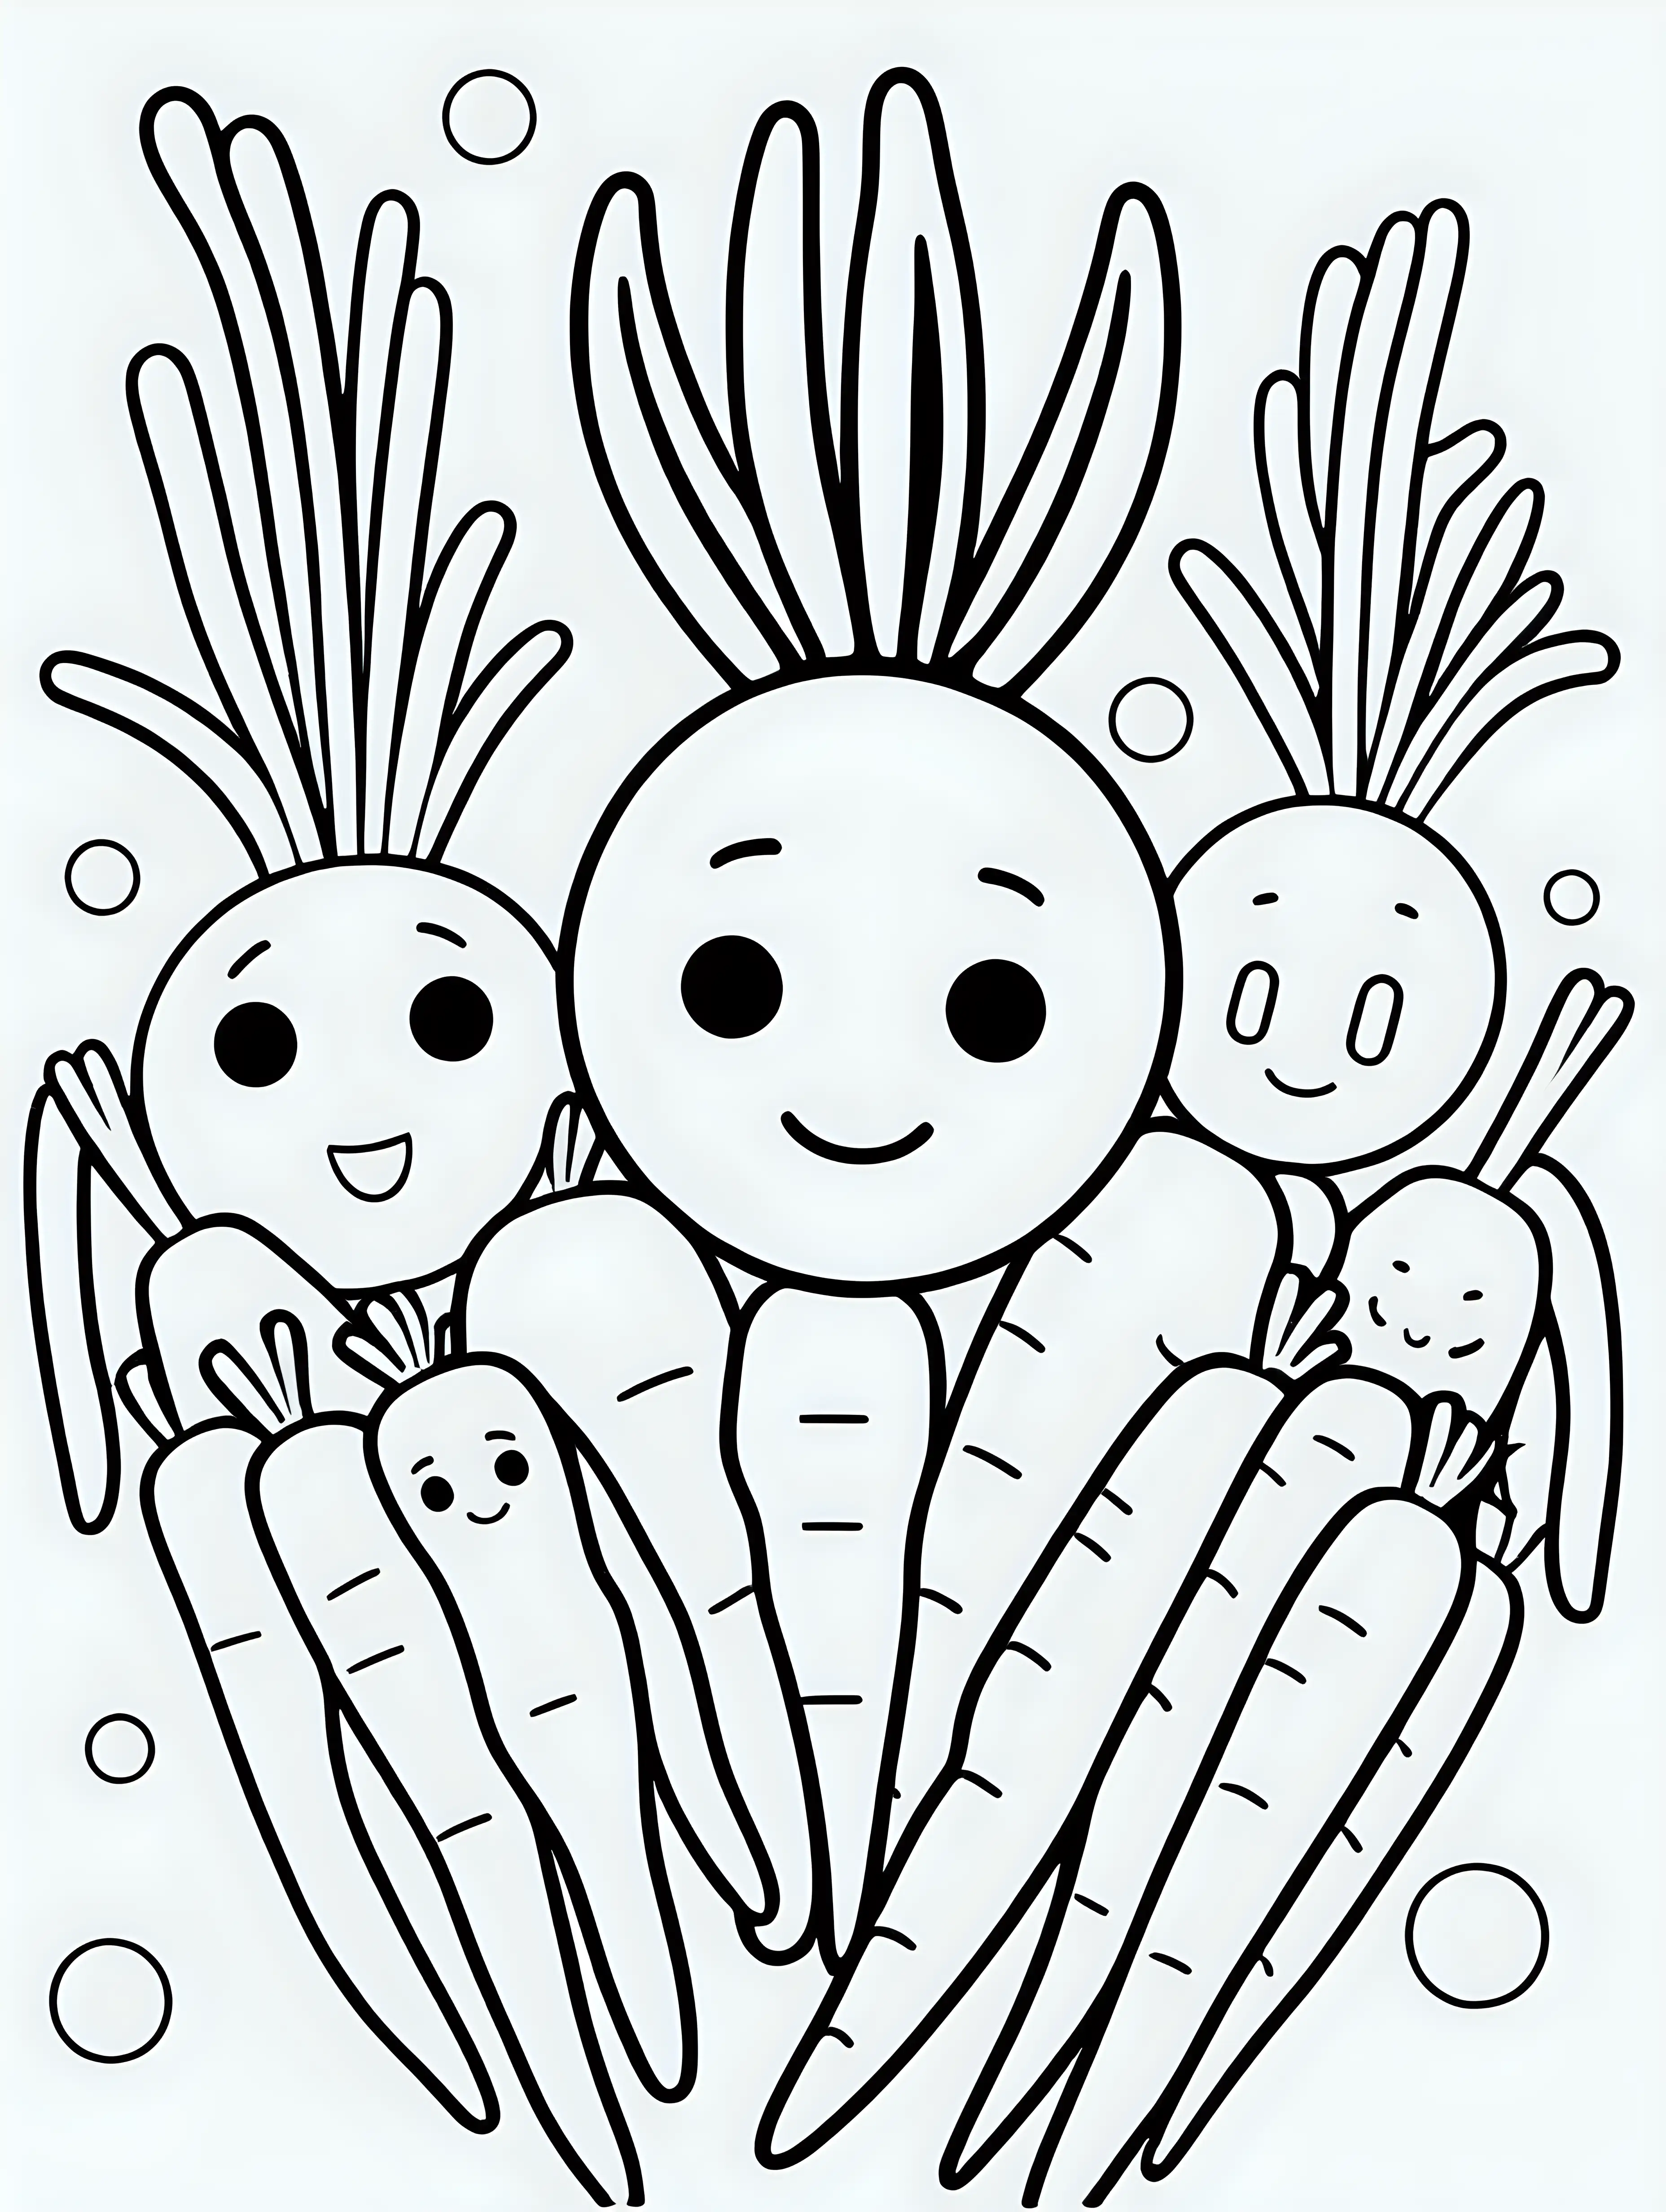 coloring book, cartoon drawing, clean black and white, single line, white background, cute carrots, emojis